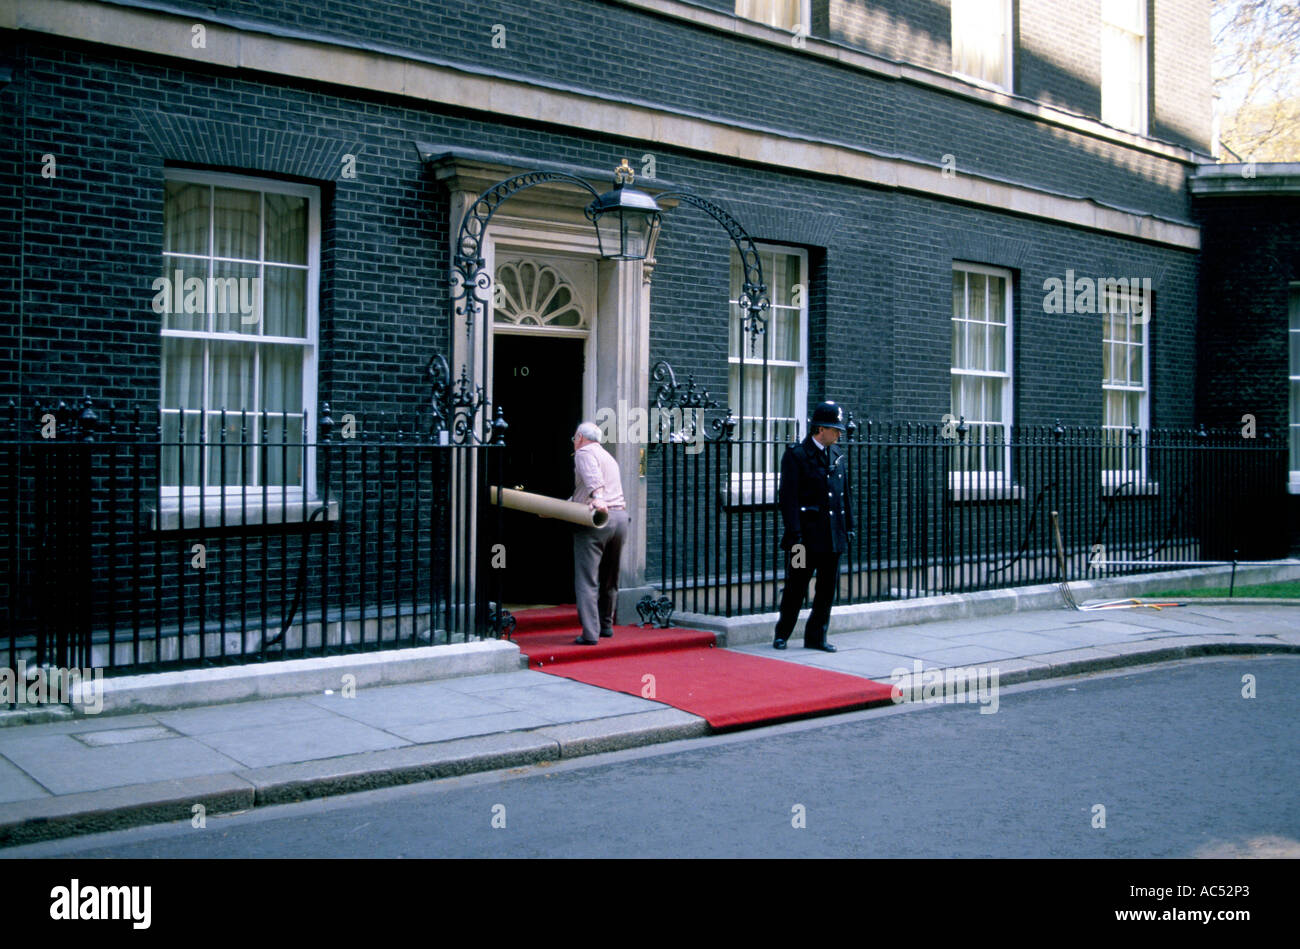 ROLLING OUT THE RED CARPET AT 10 DOWNING STREET LONDON  Stock Photo